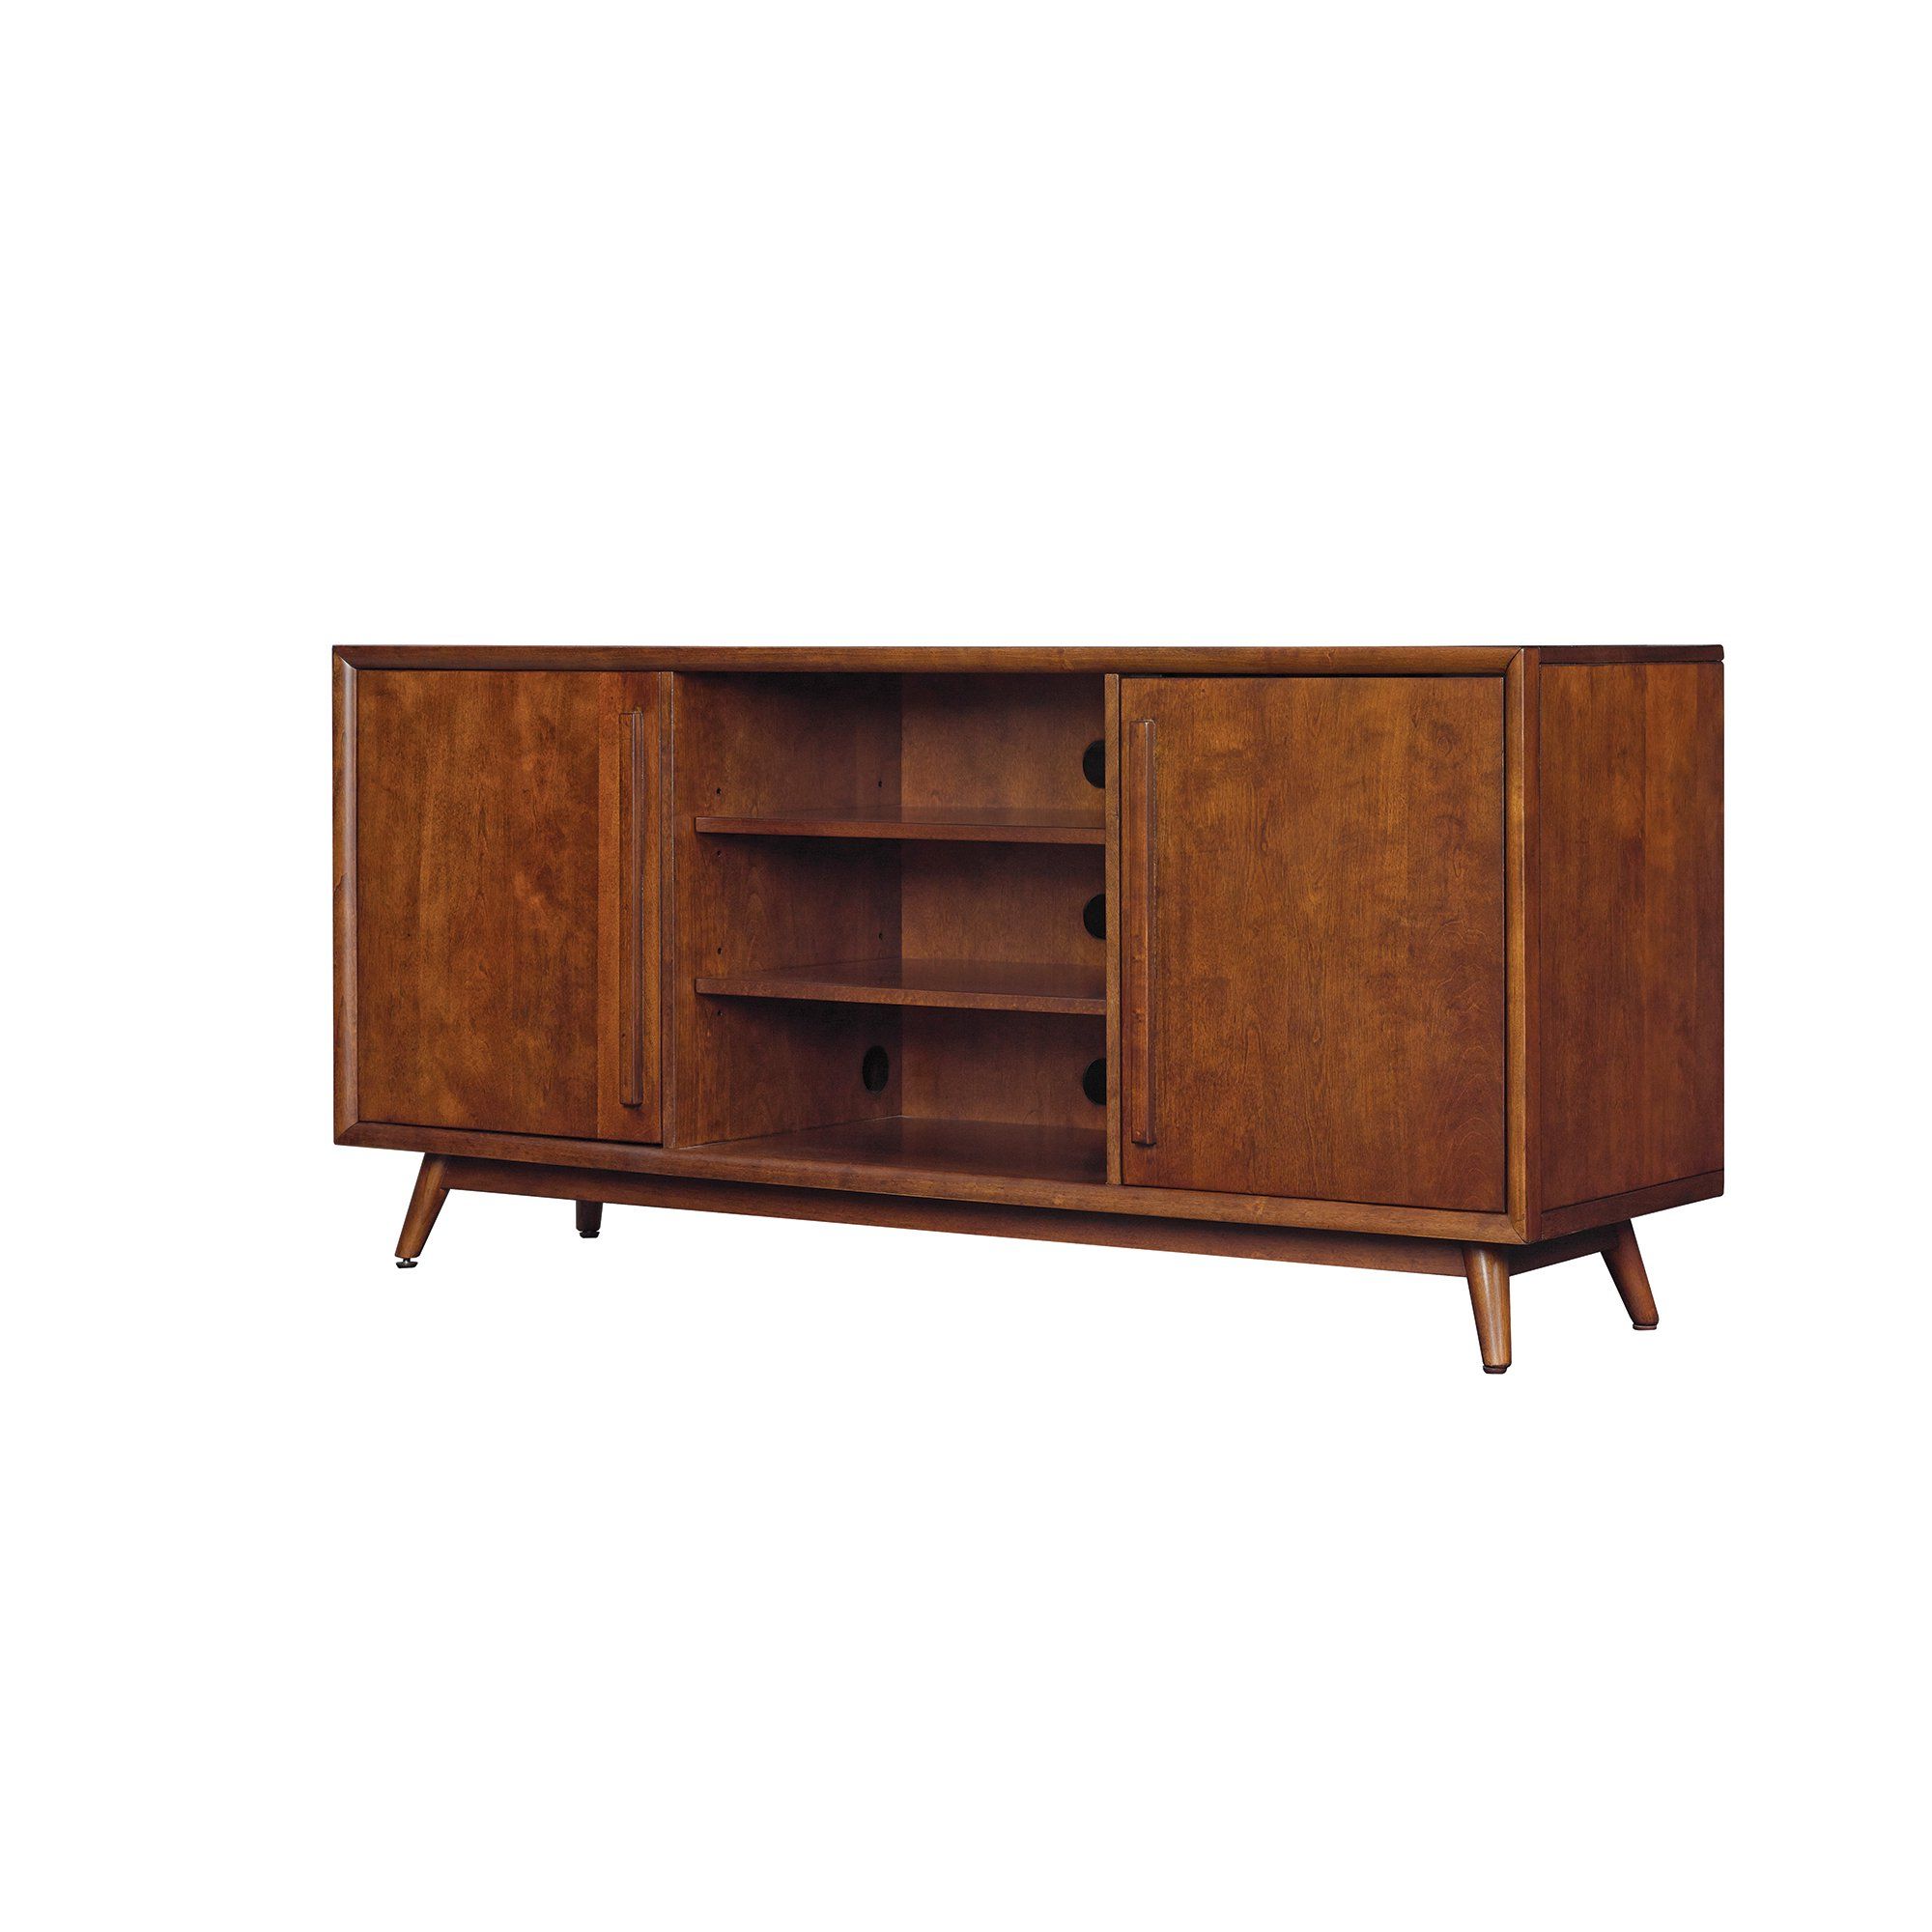 Shop Leawood Tv Stand For Tvs Up To 60 Inches, Mahogany Cherry Inside Canyon 74 Inch Tv Stands (Gallery 19 of 20)